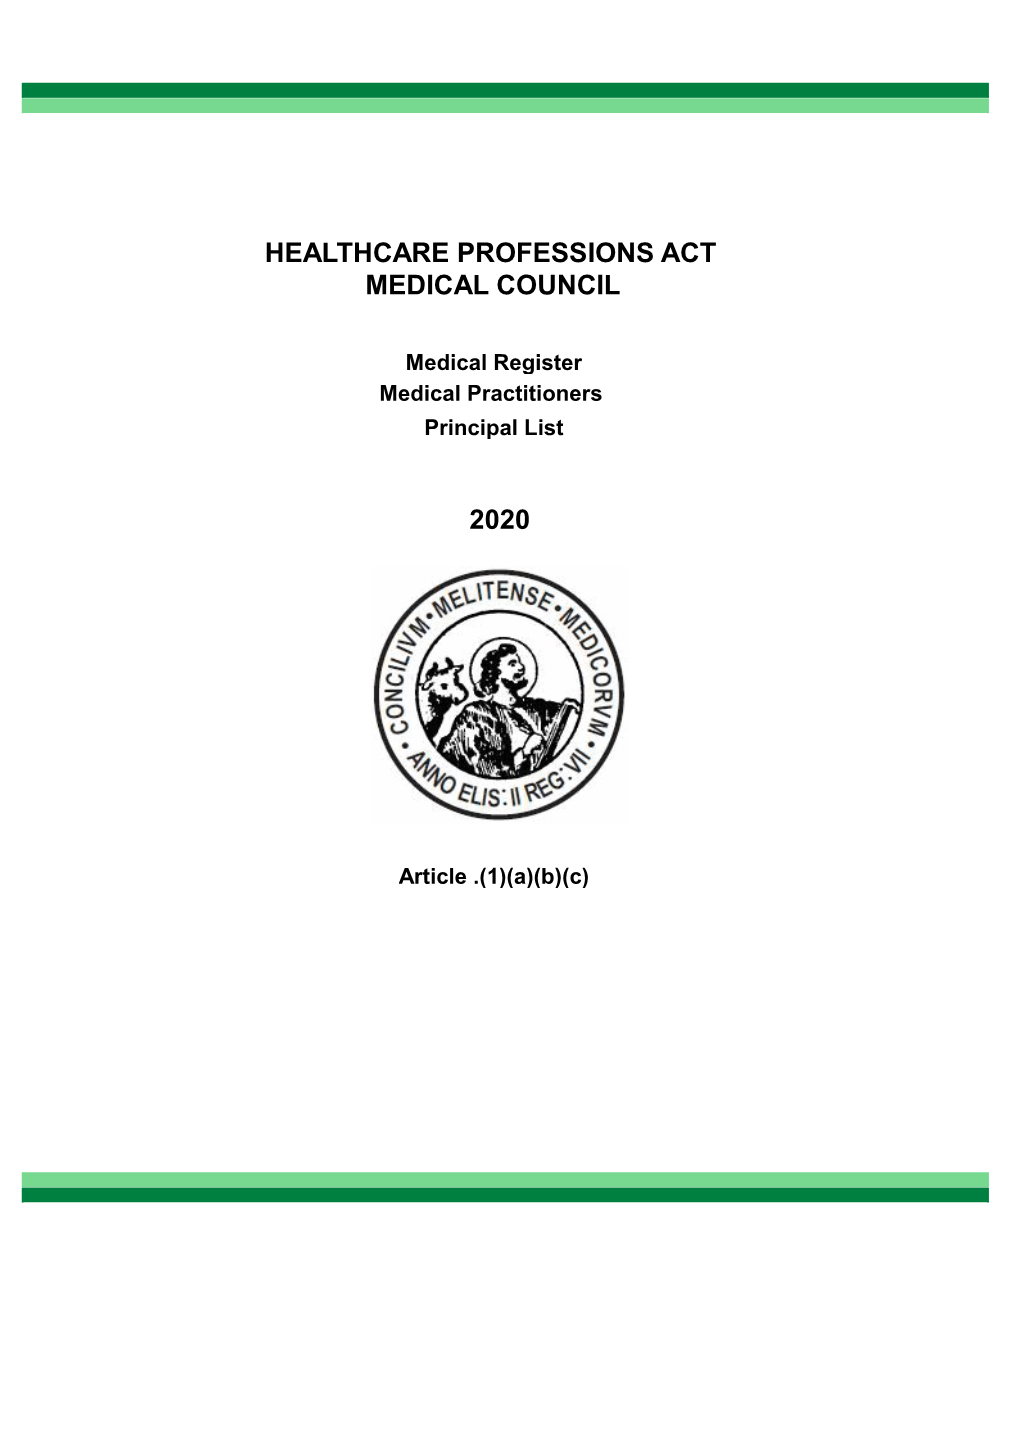 Healthcare Professions Act Medical Council 2020